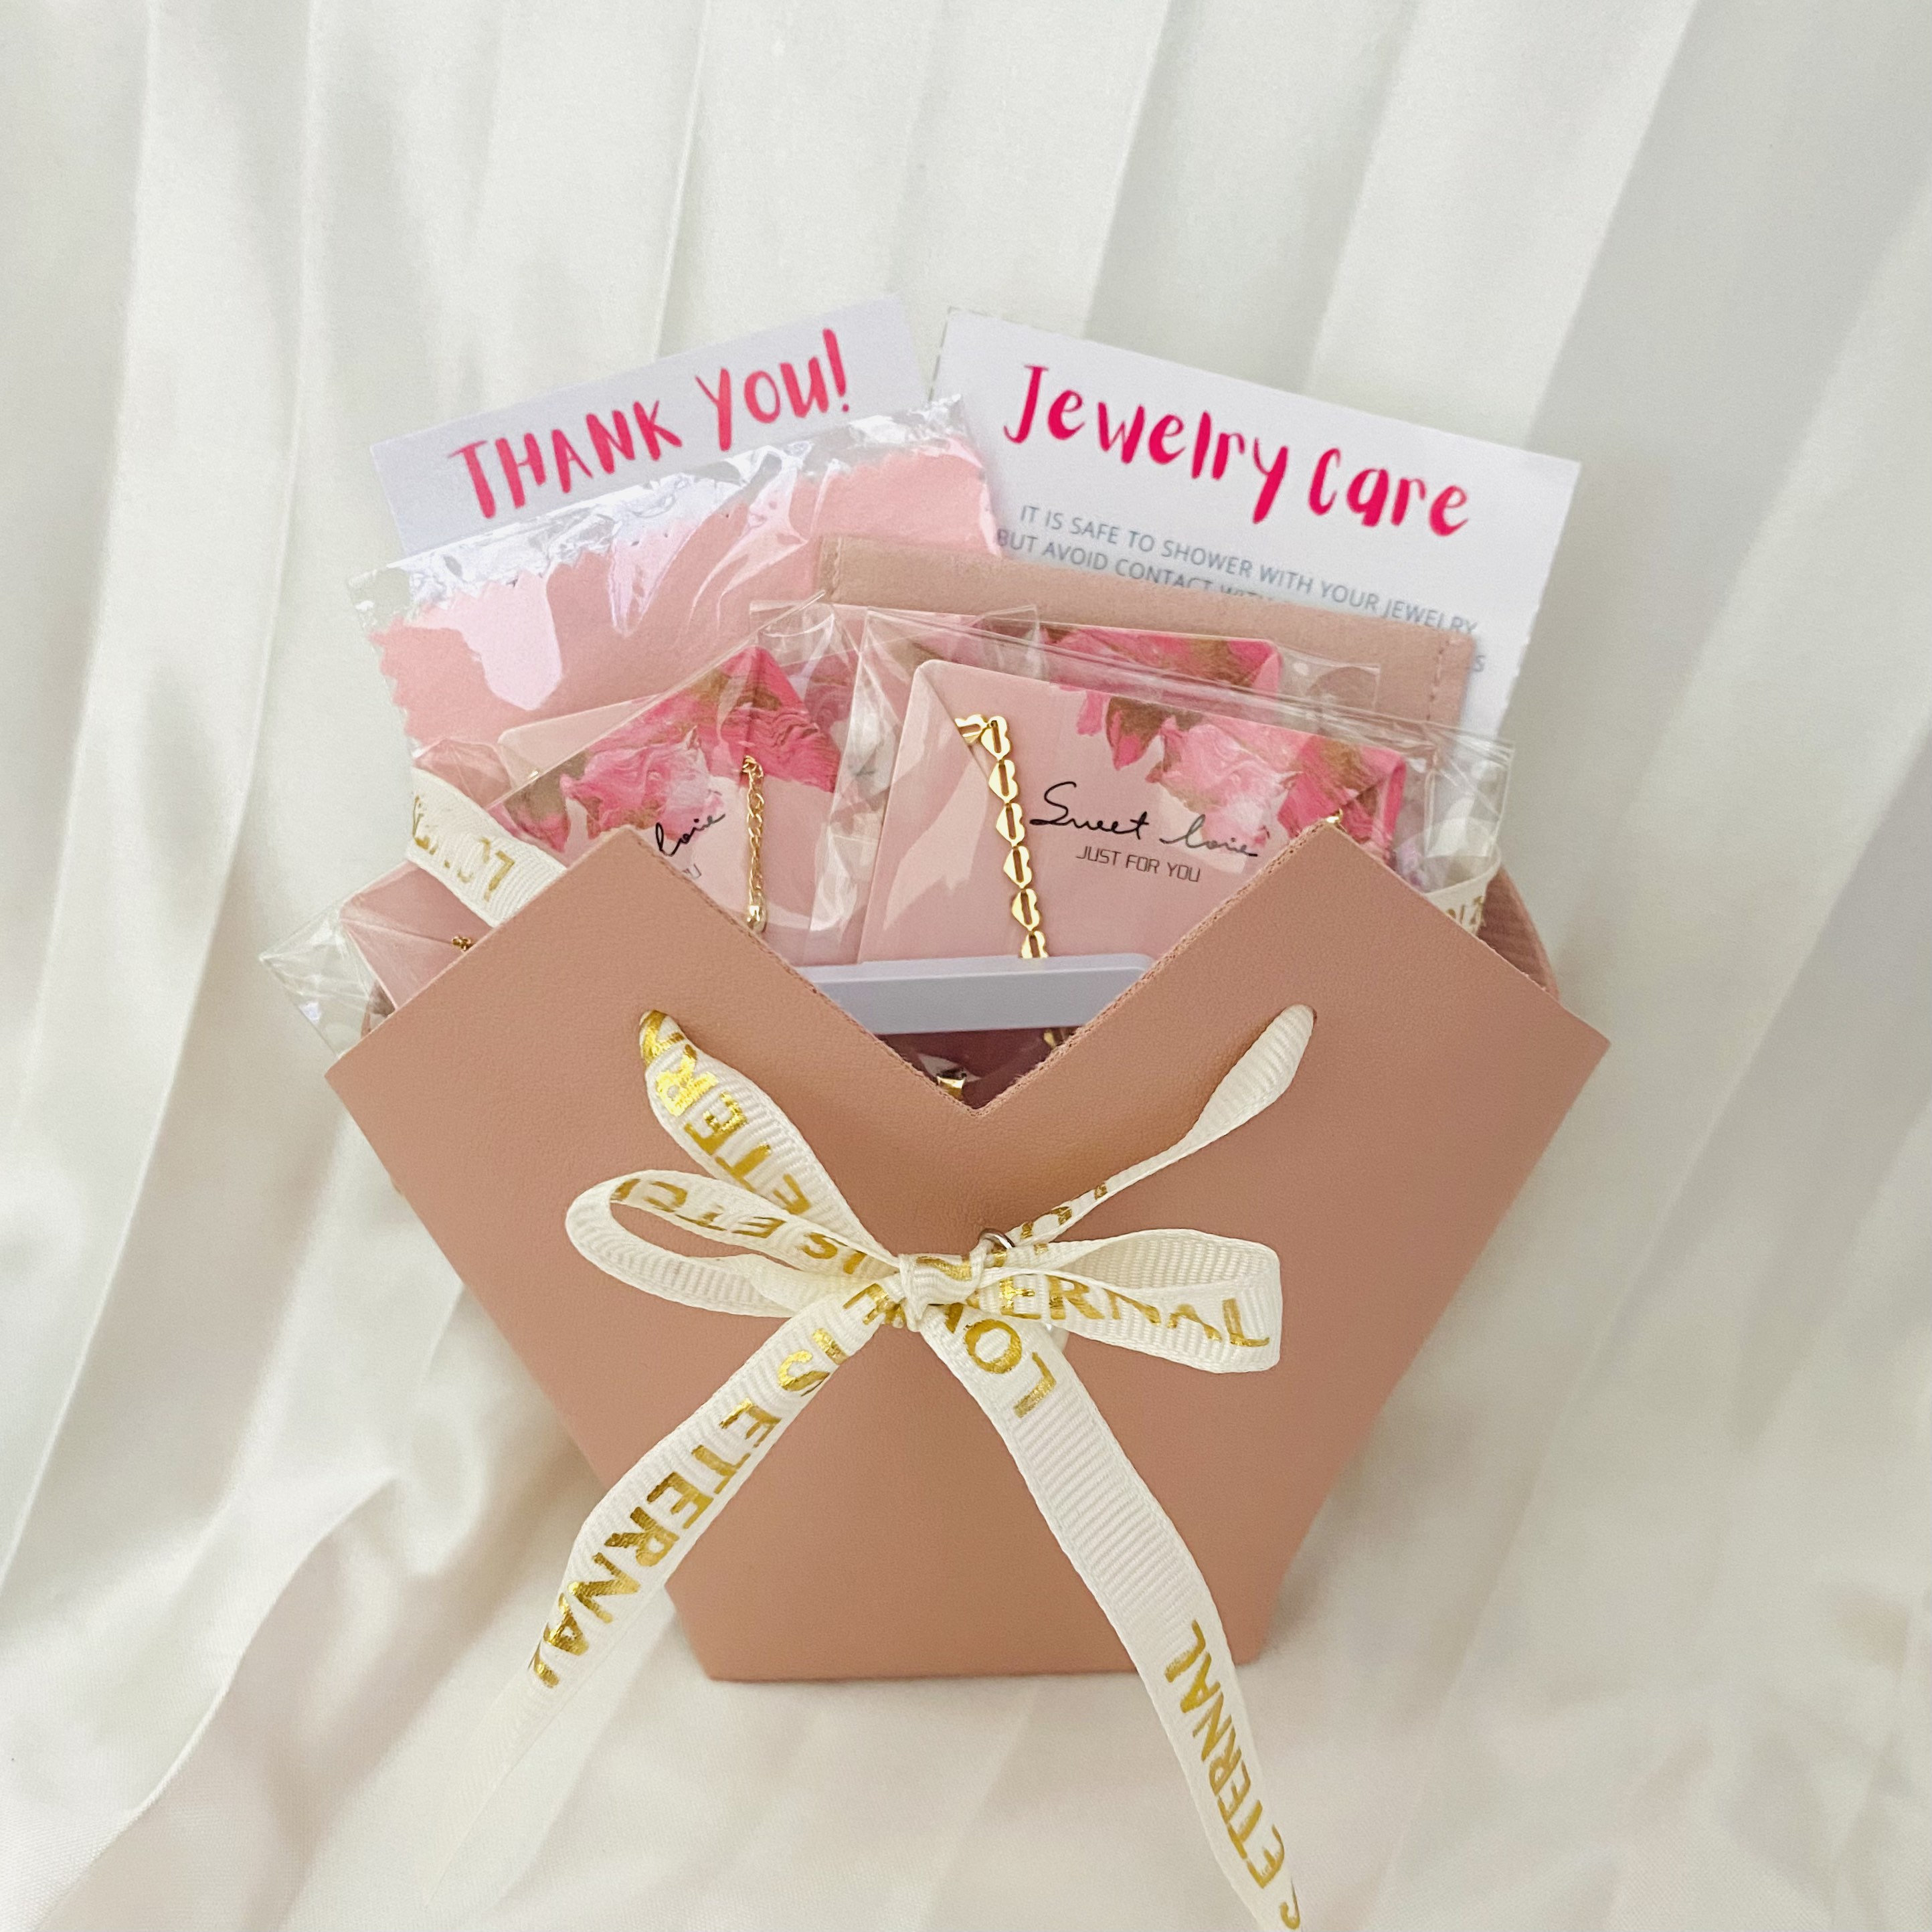 Jewelry Gift Box - Surprise Box for Her